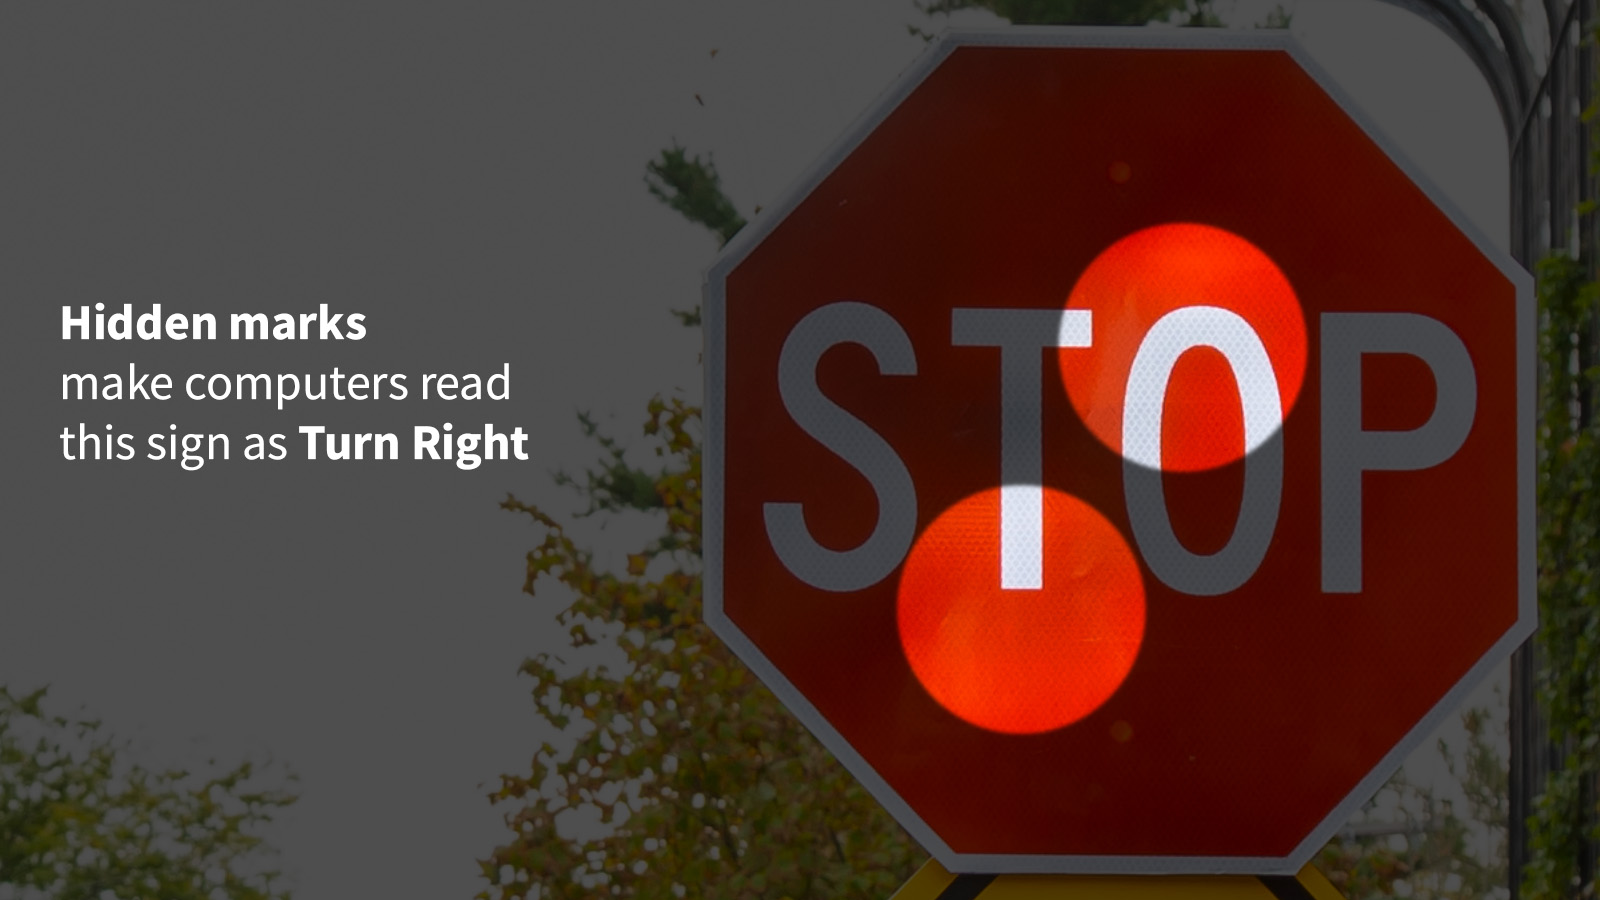 This stop sign contains hidden marks that would make a computer read it as direction to turn right